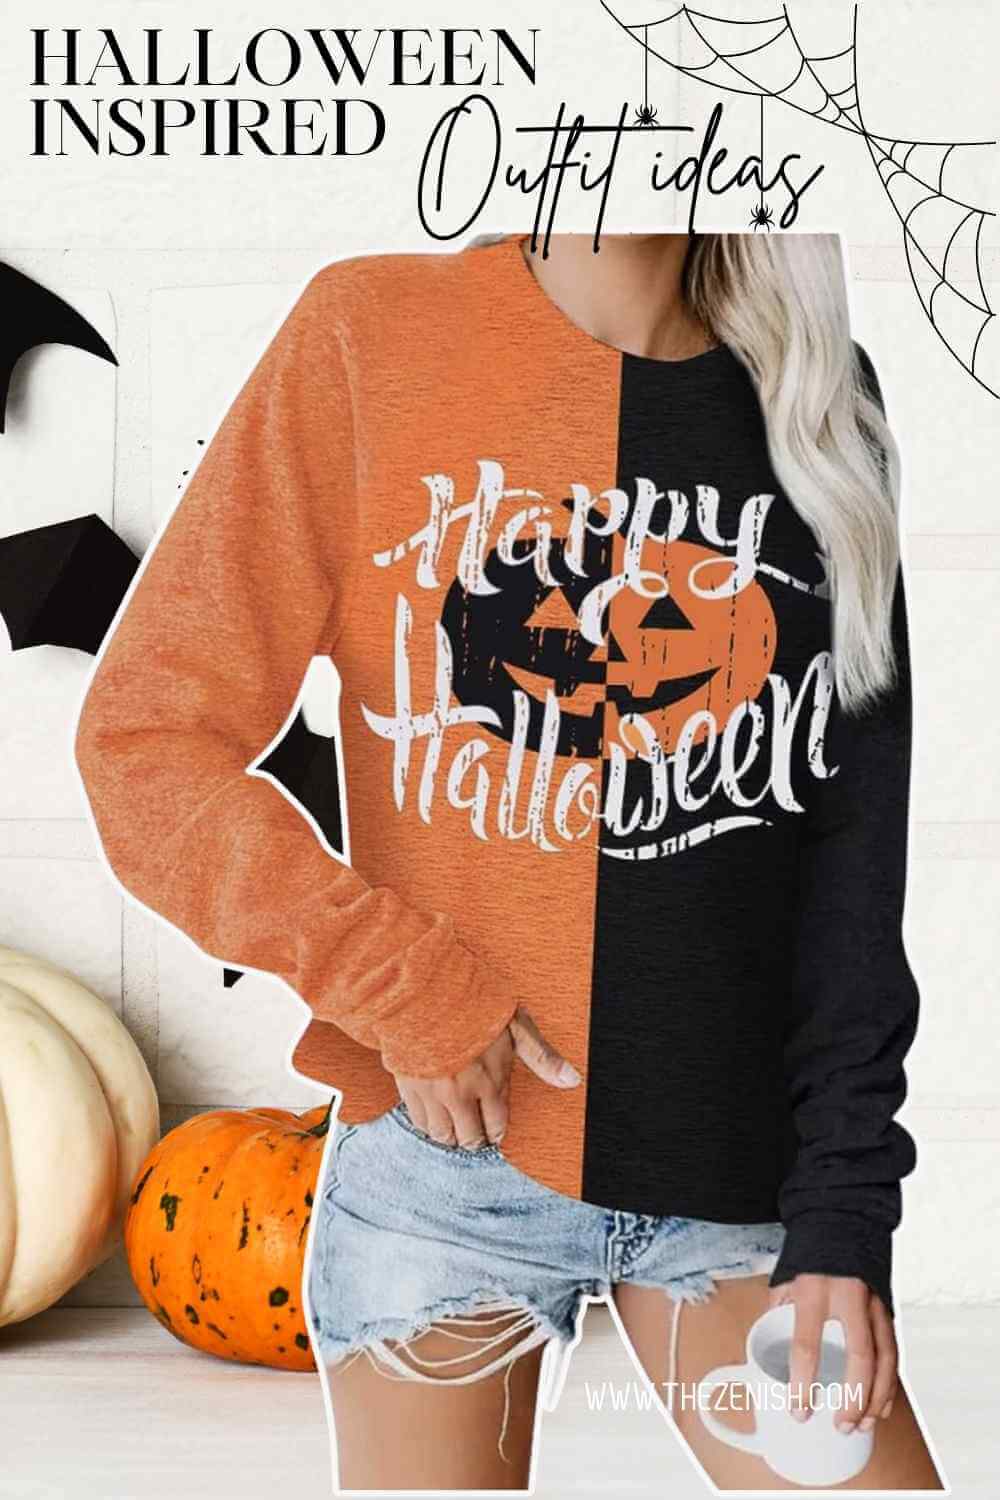 13 Spooktacular Halloween Inspired Outfit Ideas 9 13 Spooktacular Halloween Inspired Outfit Ideas